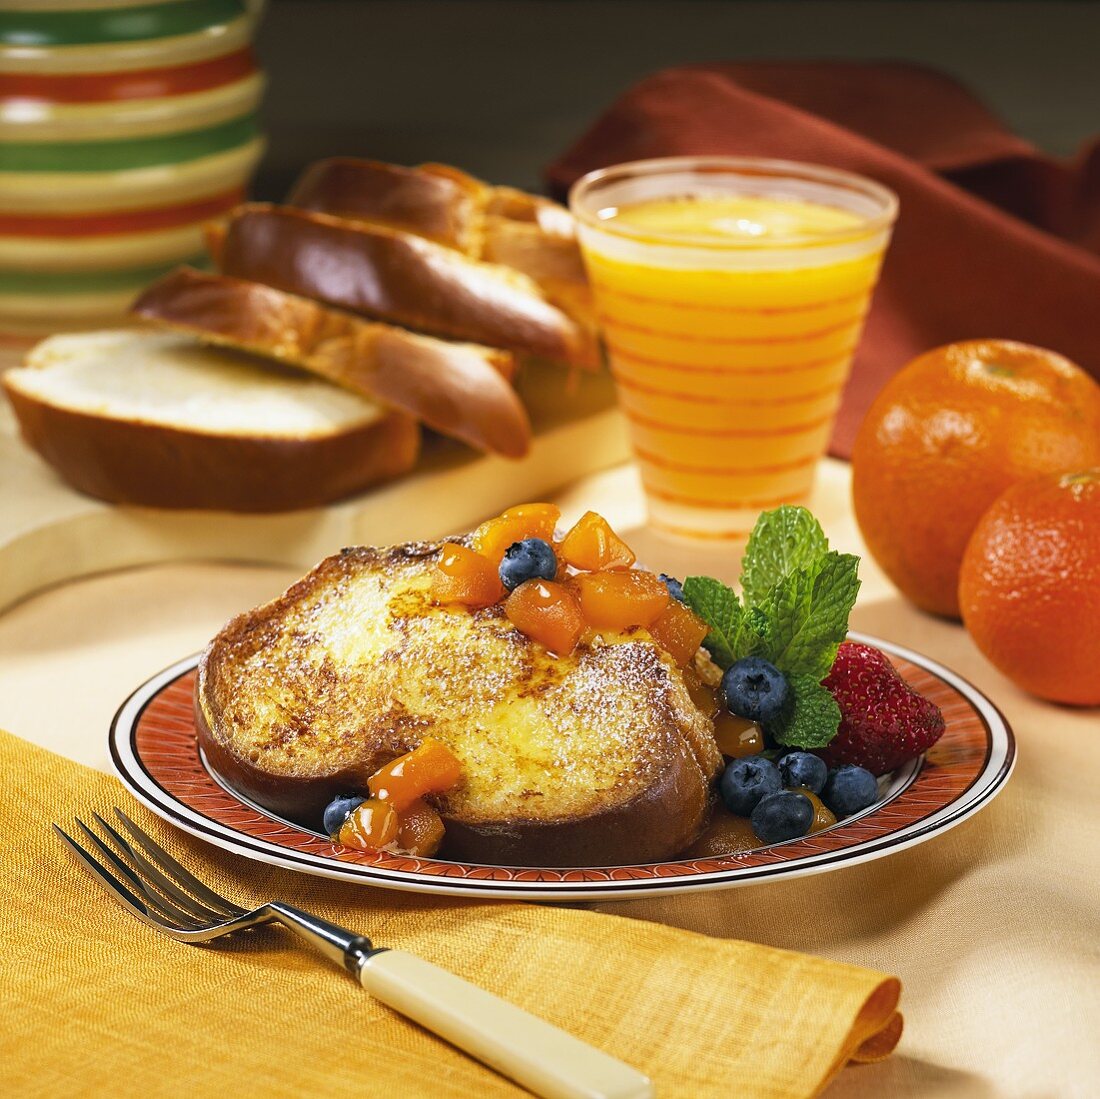 Challah French Toast with Apricot Sauce and Orange Juice